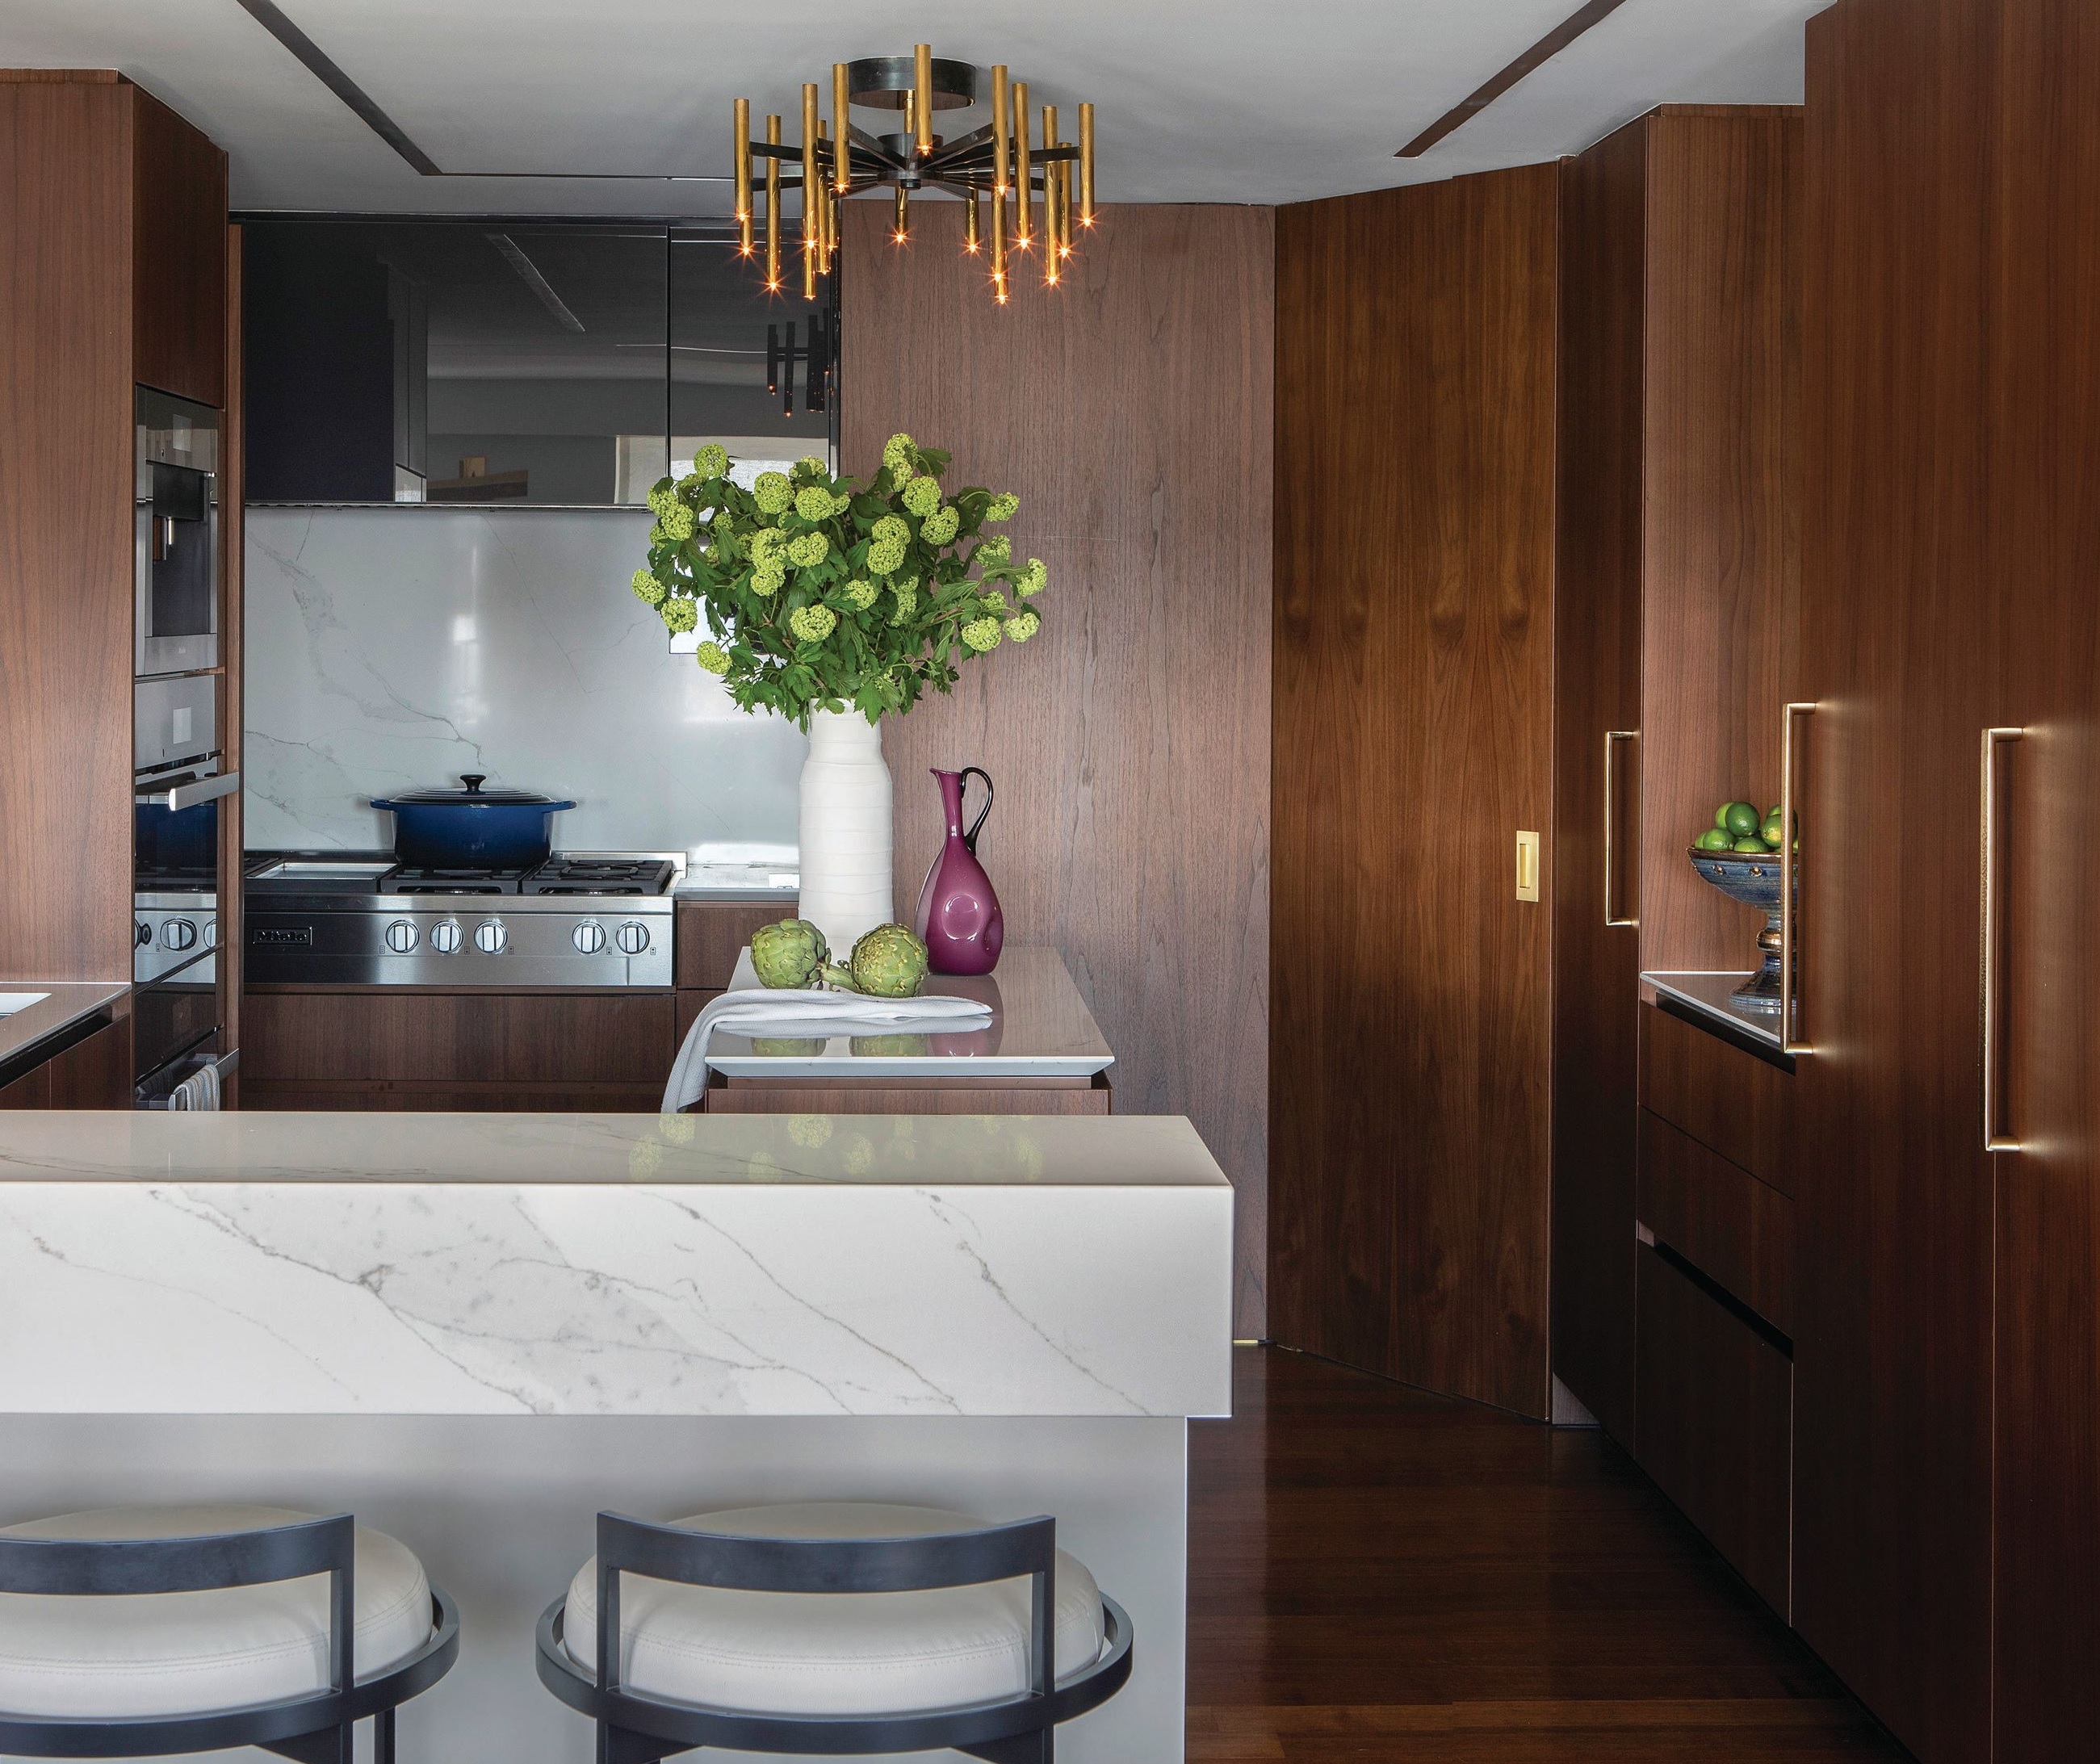 Poliform cabinets and Miele appliances complement a John Boone Inc. lighting fixture in the kitchen. Photographed by Costas Picadas